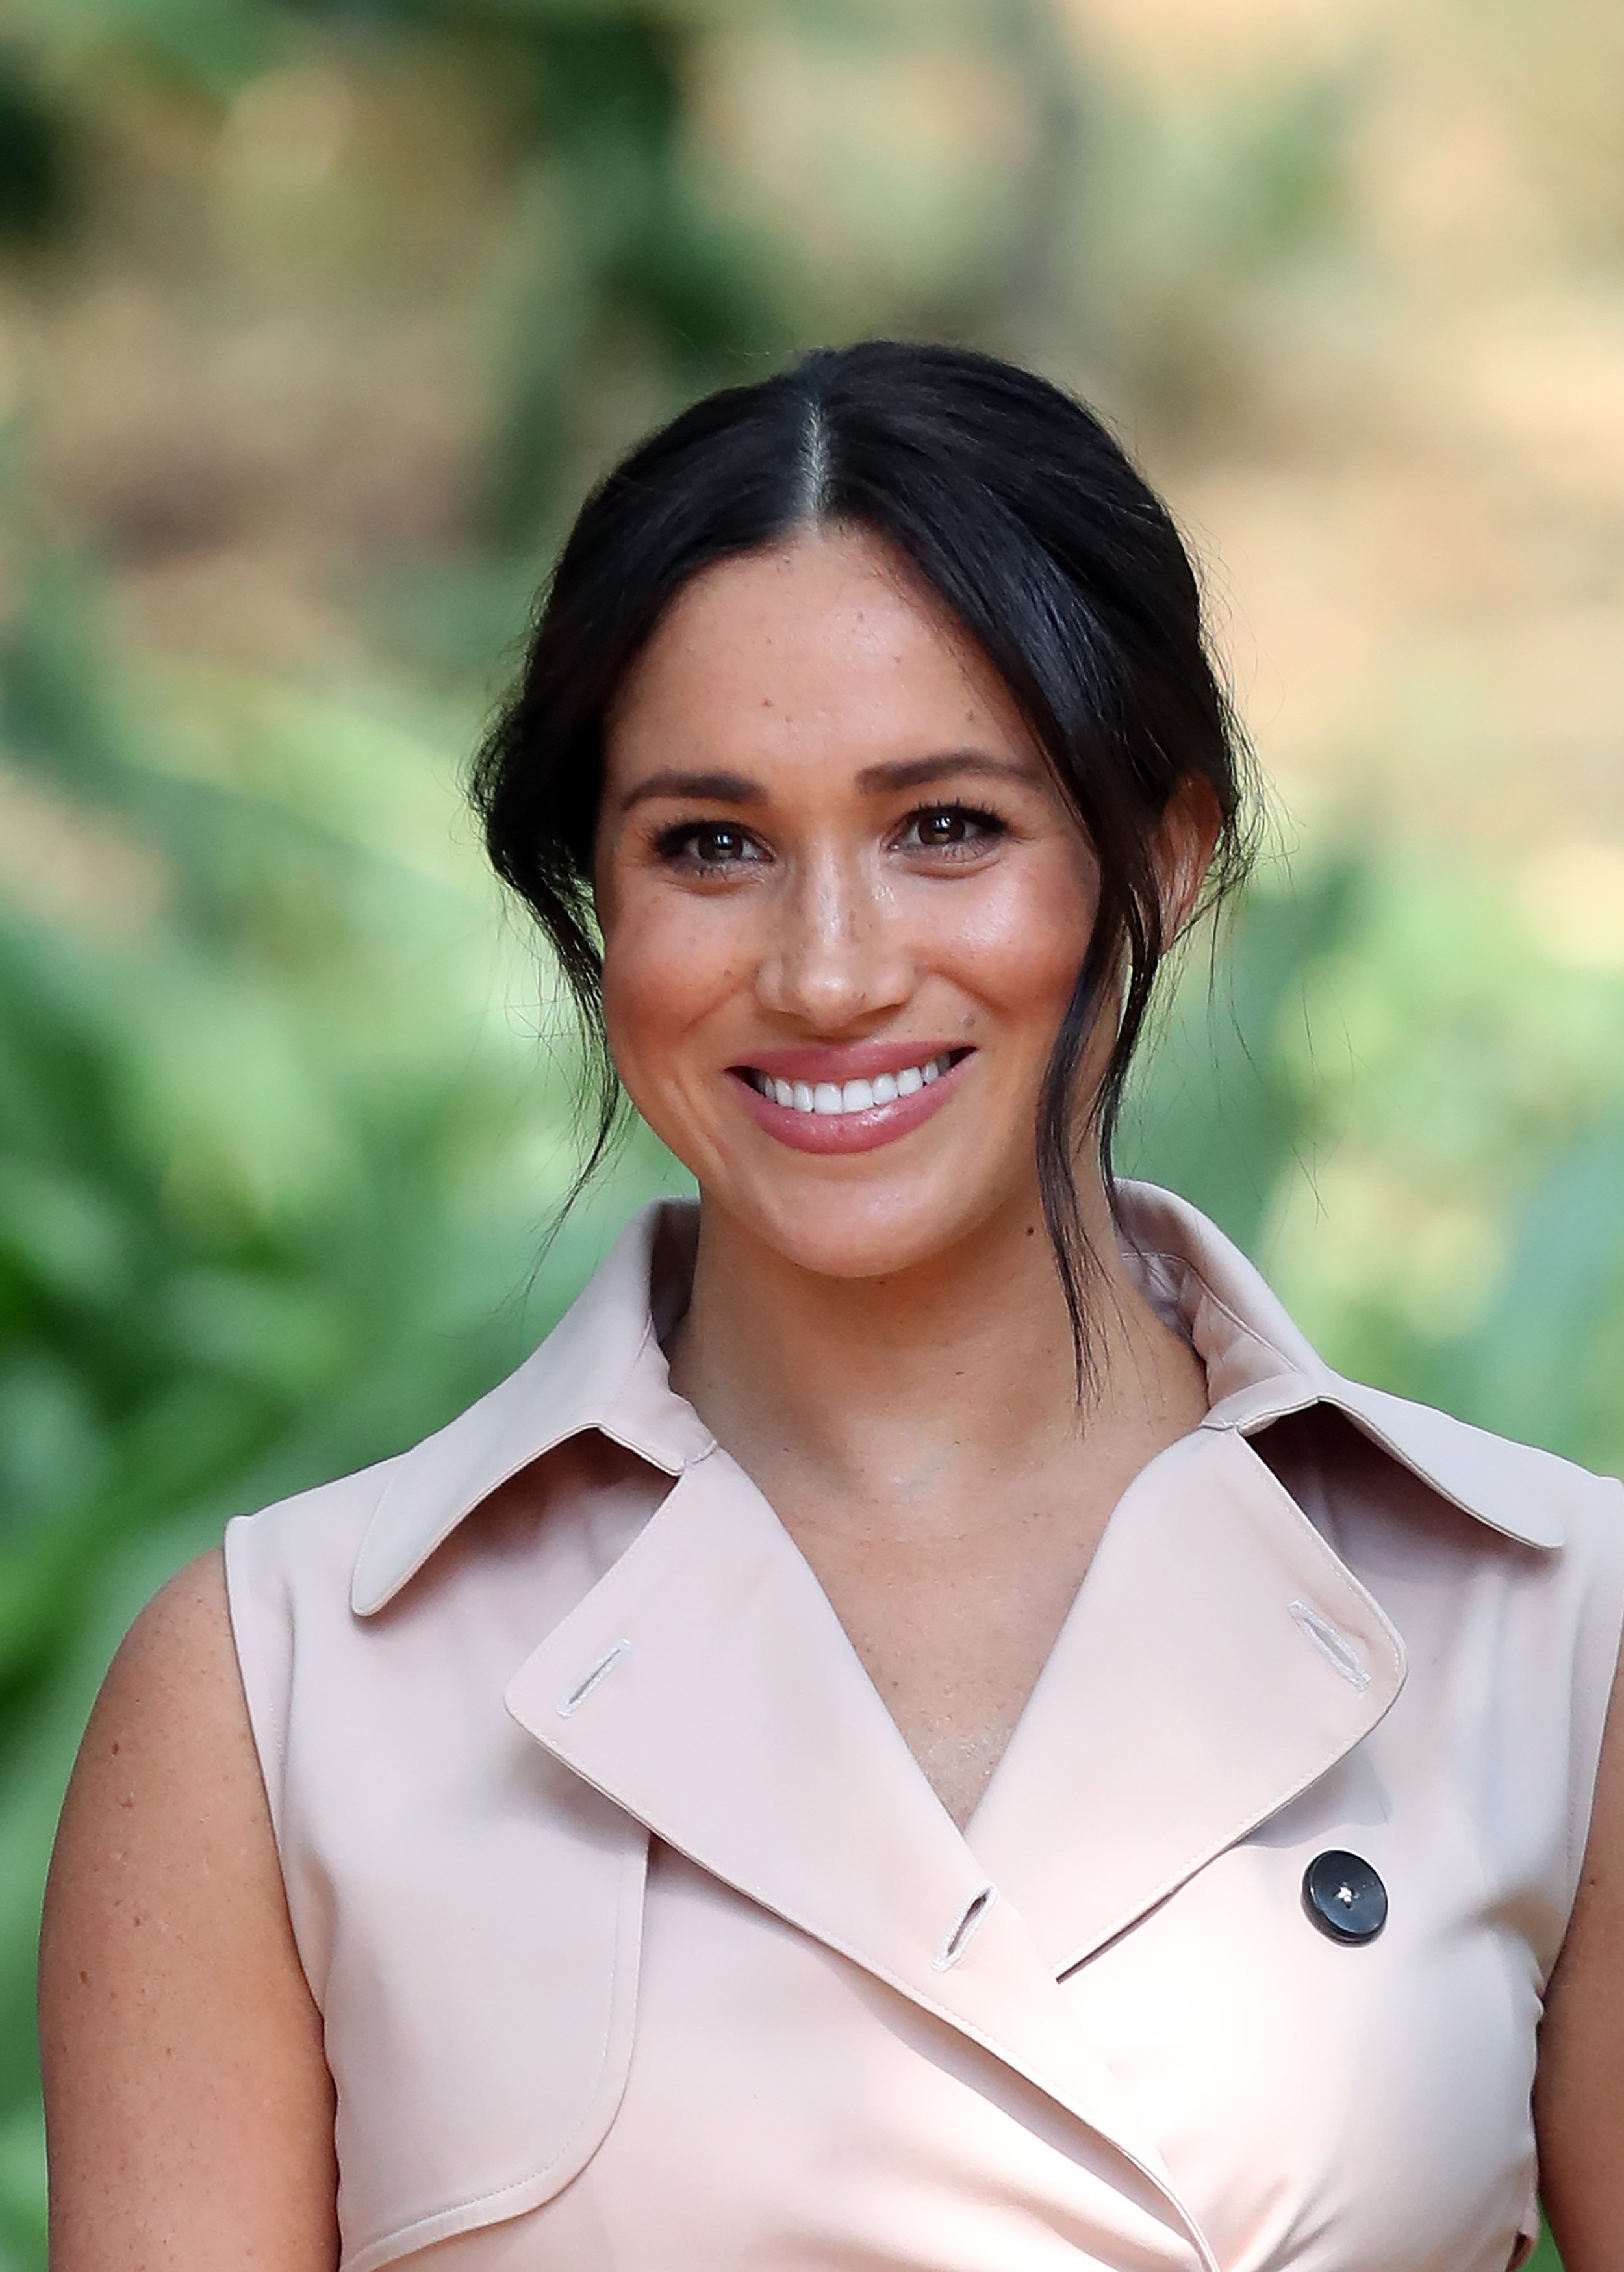 Meghan Markle during a Creative Industries and Business Reception on October 02, 2019 in Johannesburg, South Africa. | Source: Getty Images